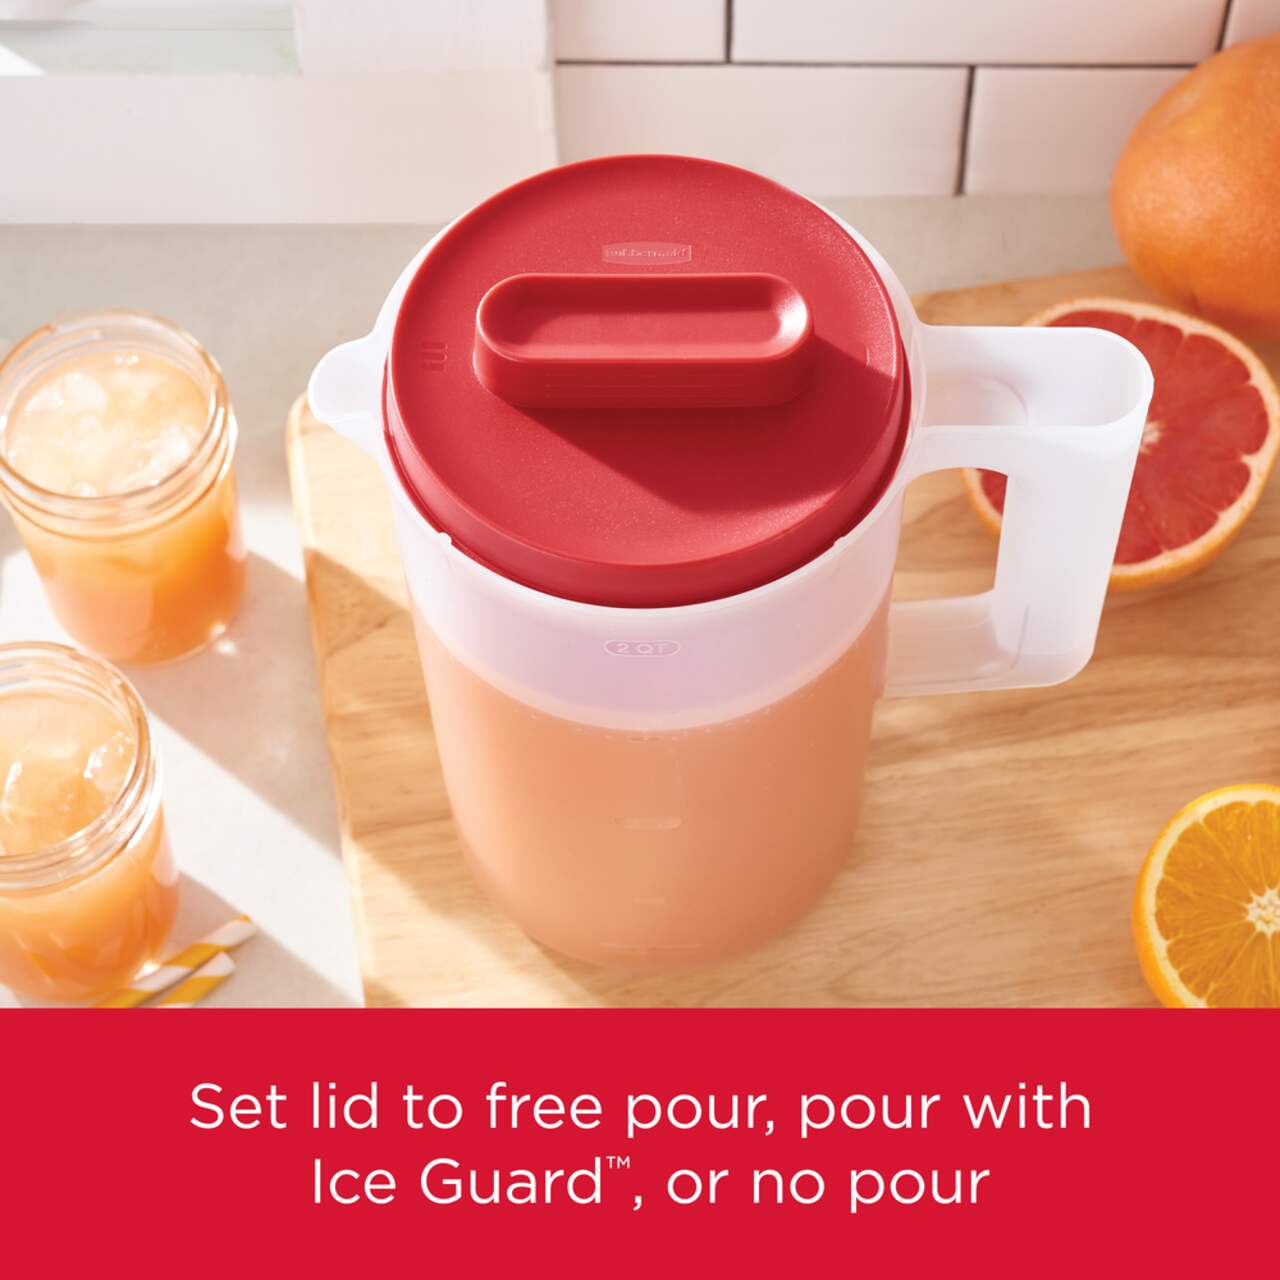 https://media-www.canadiantire.ca/product/living/kitchen/food-storage/0421619/rubbermaid-servin-saver-1-89l-juice-pitcher-0b51a67a-852e-4863-9135-70b8f2a10752.png?imdensity=1&imwidth=1244&impolicy=mZoom